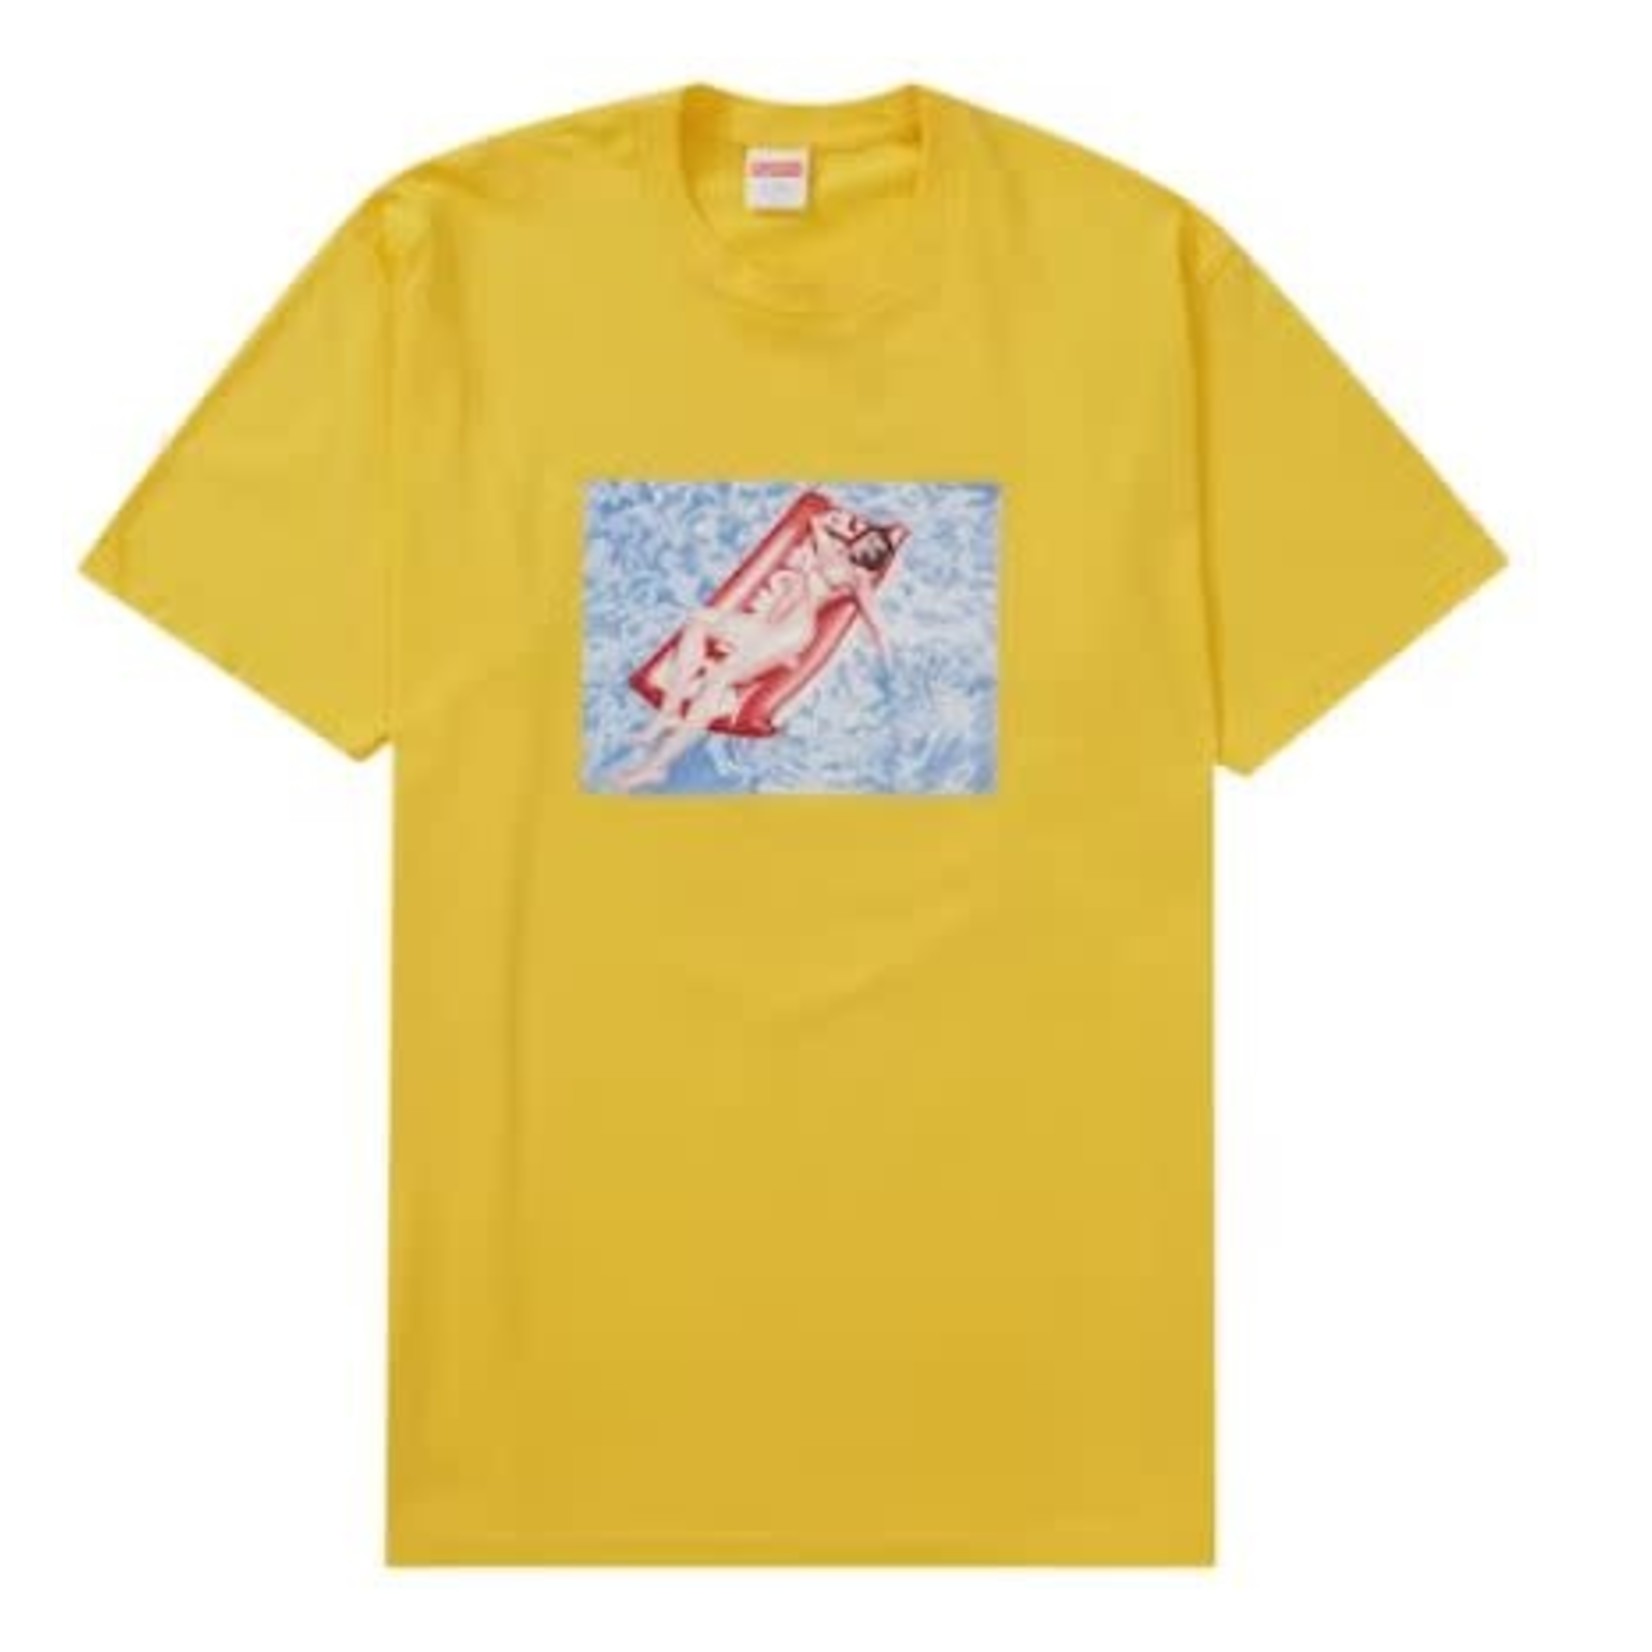 Supreme Supreme Float Tee Yellow Size XLarge, DS BRAND NEW